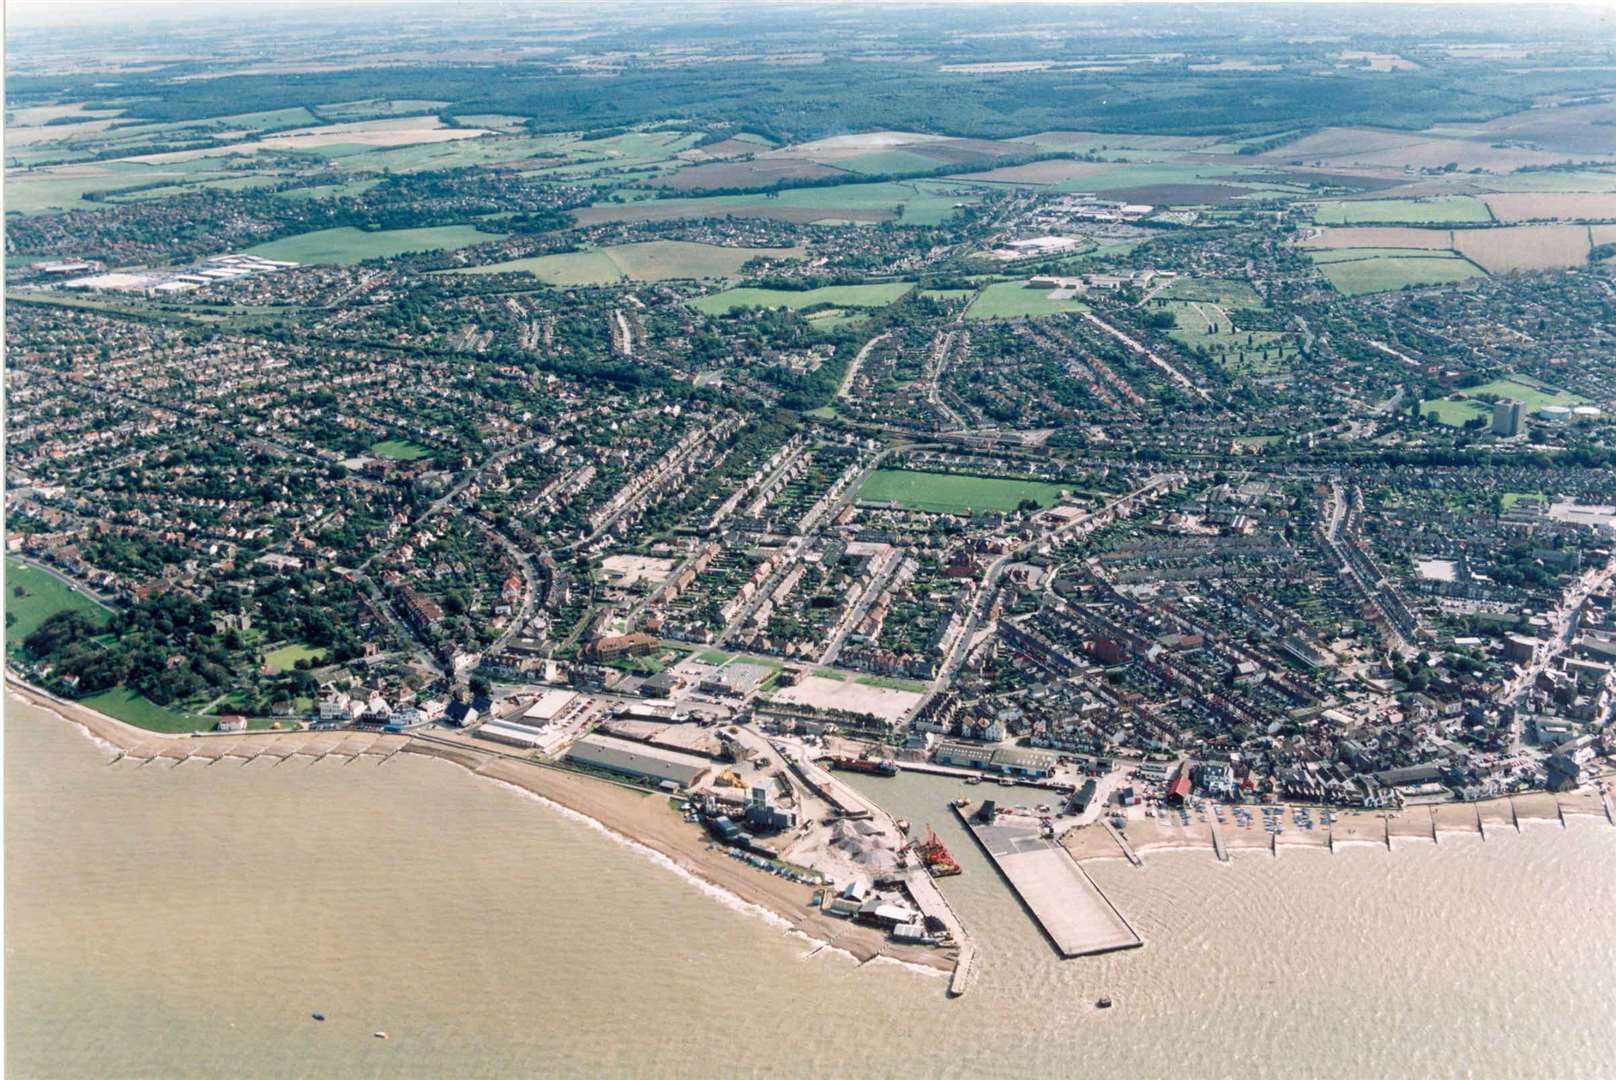 Whitstable Harbour and the town, with the beginning of Tankerton Slopes on the left, pictured in 1995